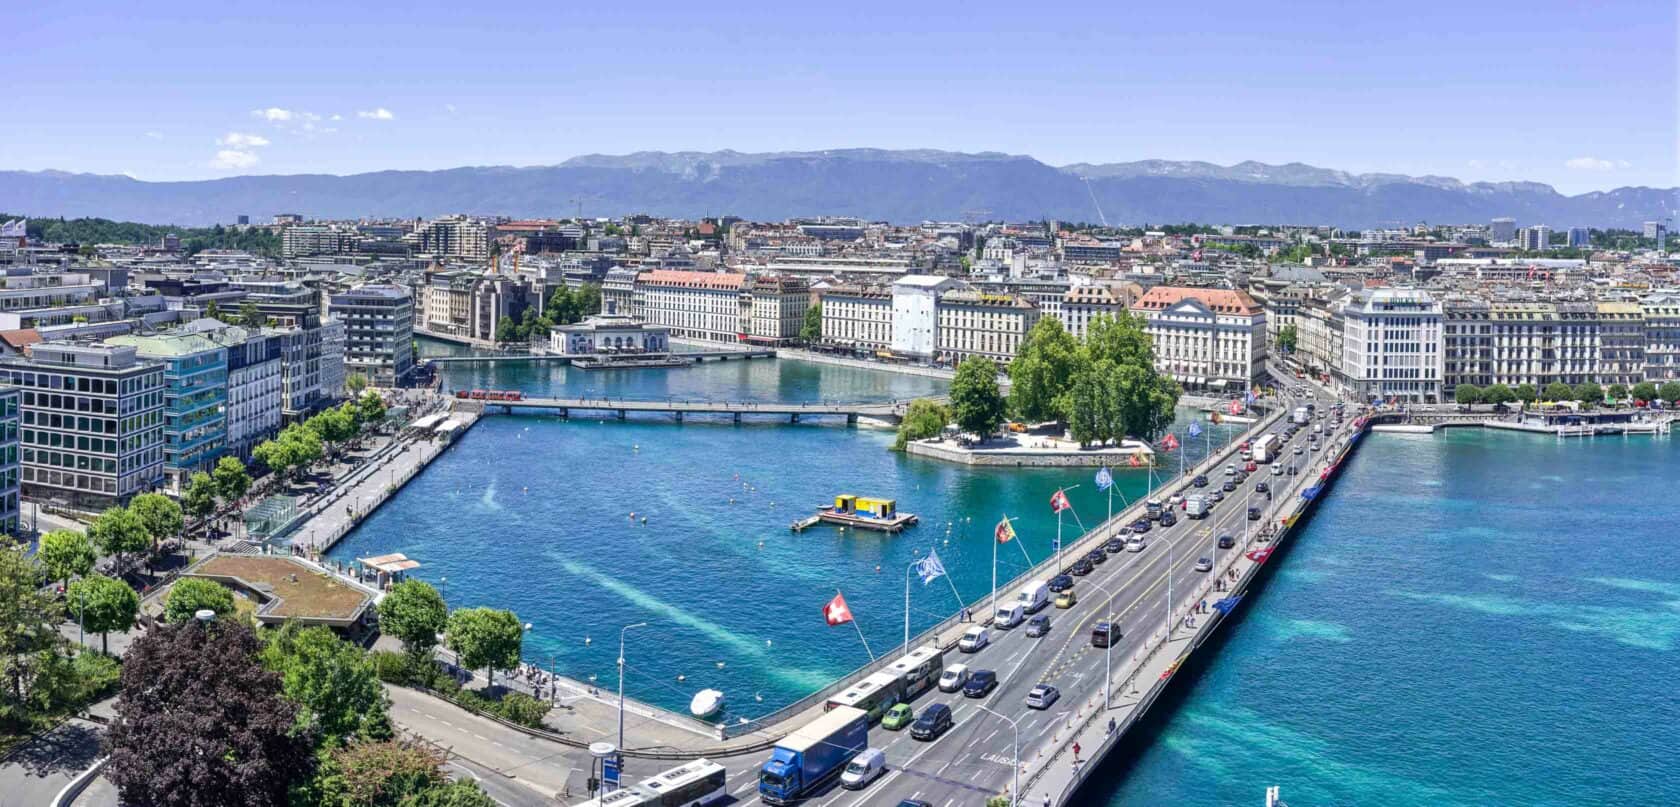 An aerial view of the city of Geneva.